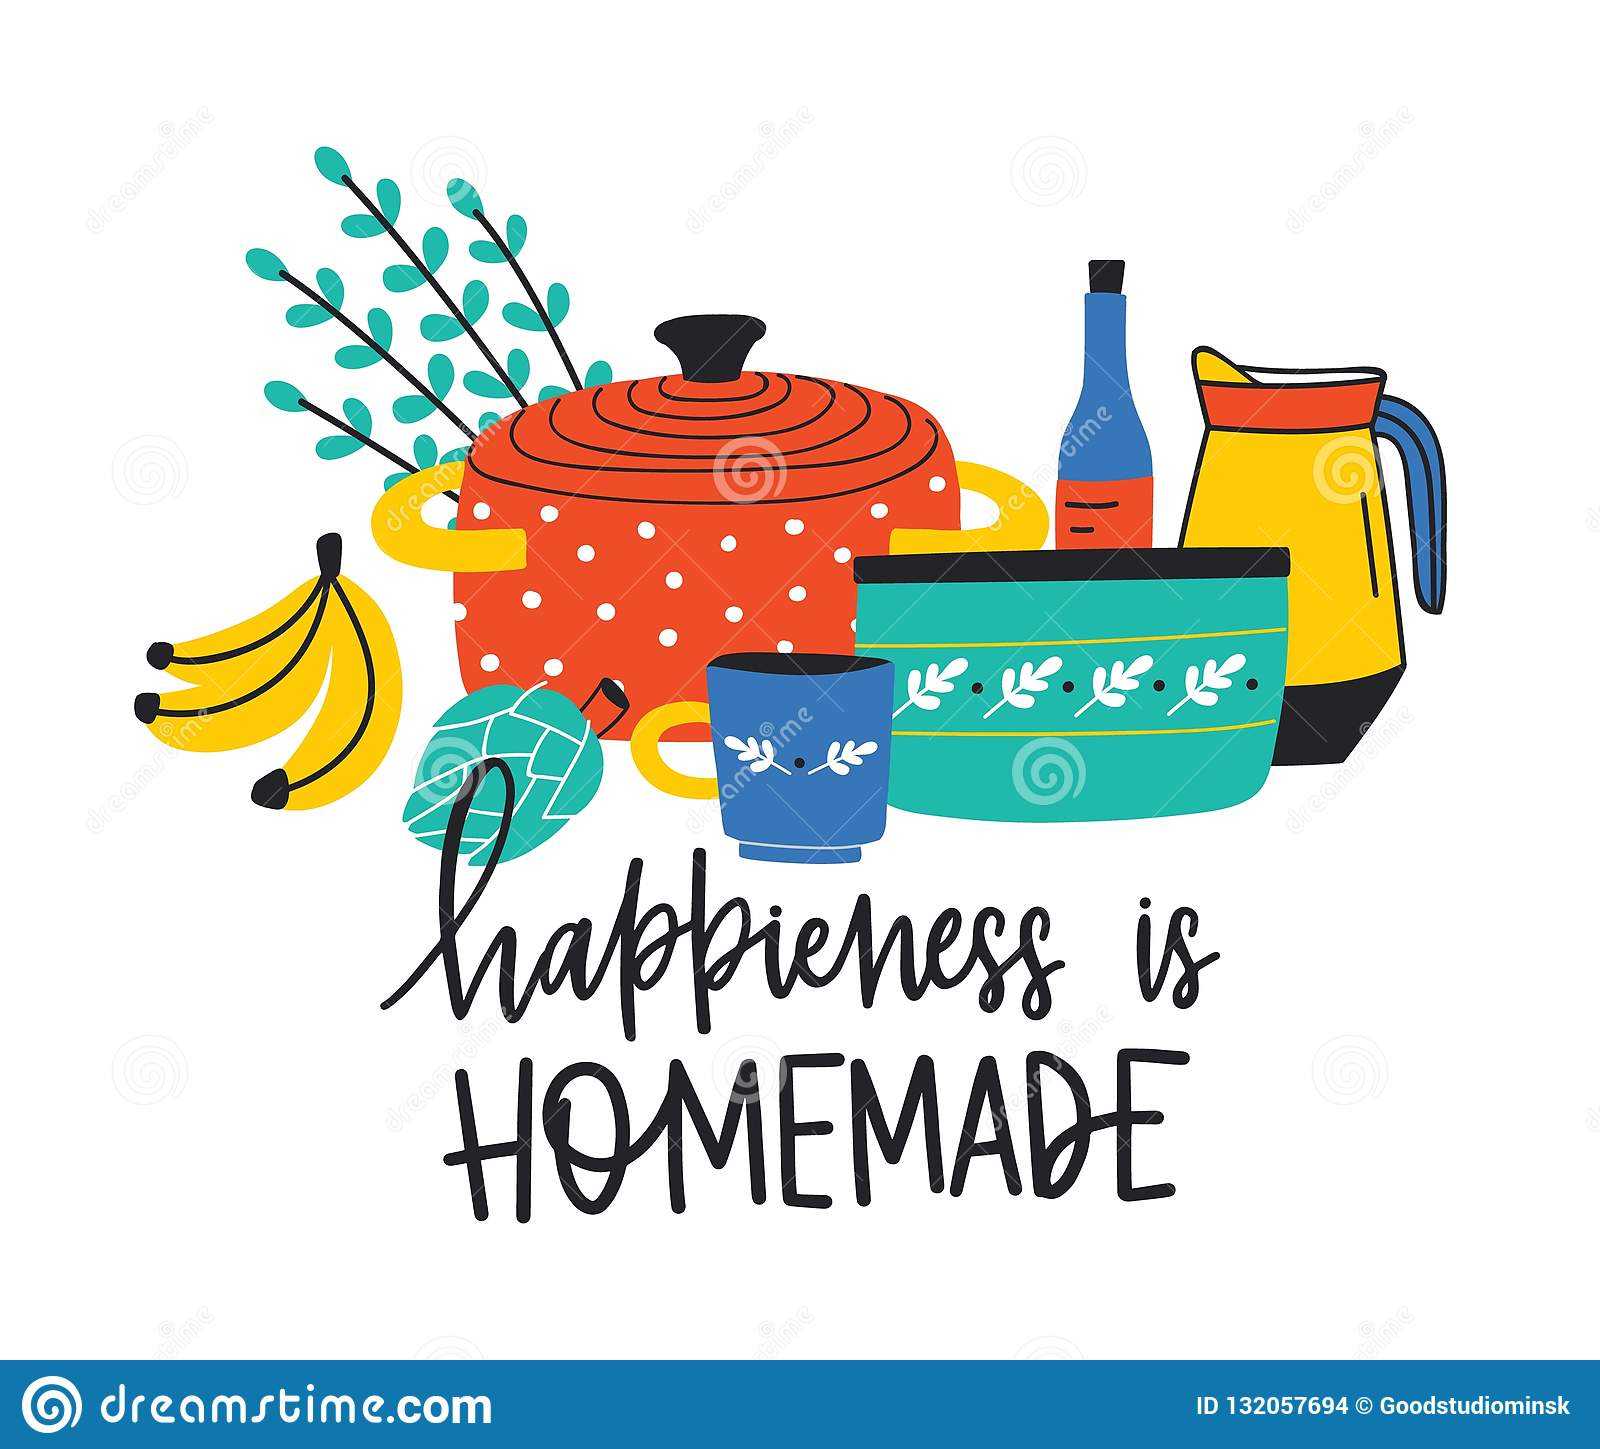 Banner Template With Kitchenware Or Kitchen Utensils For Regarding Homemade Banner Template